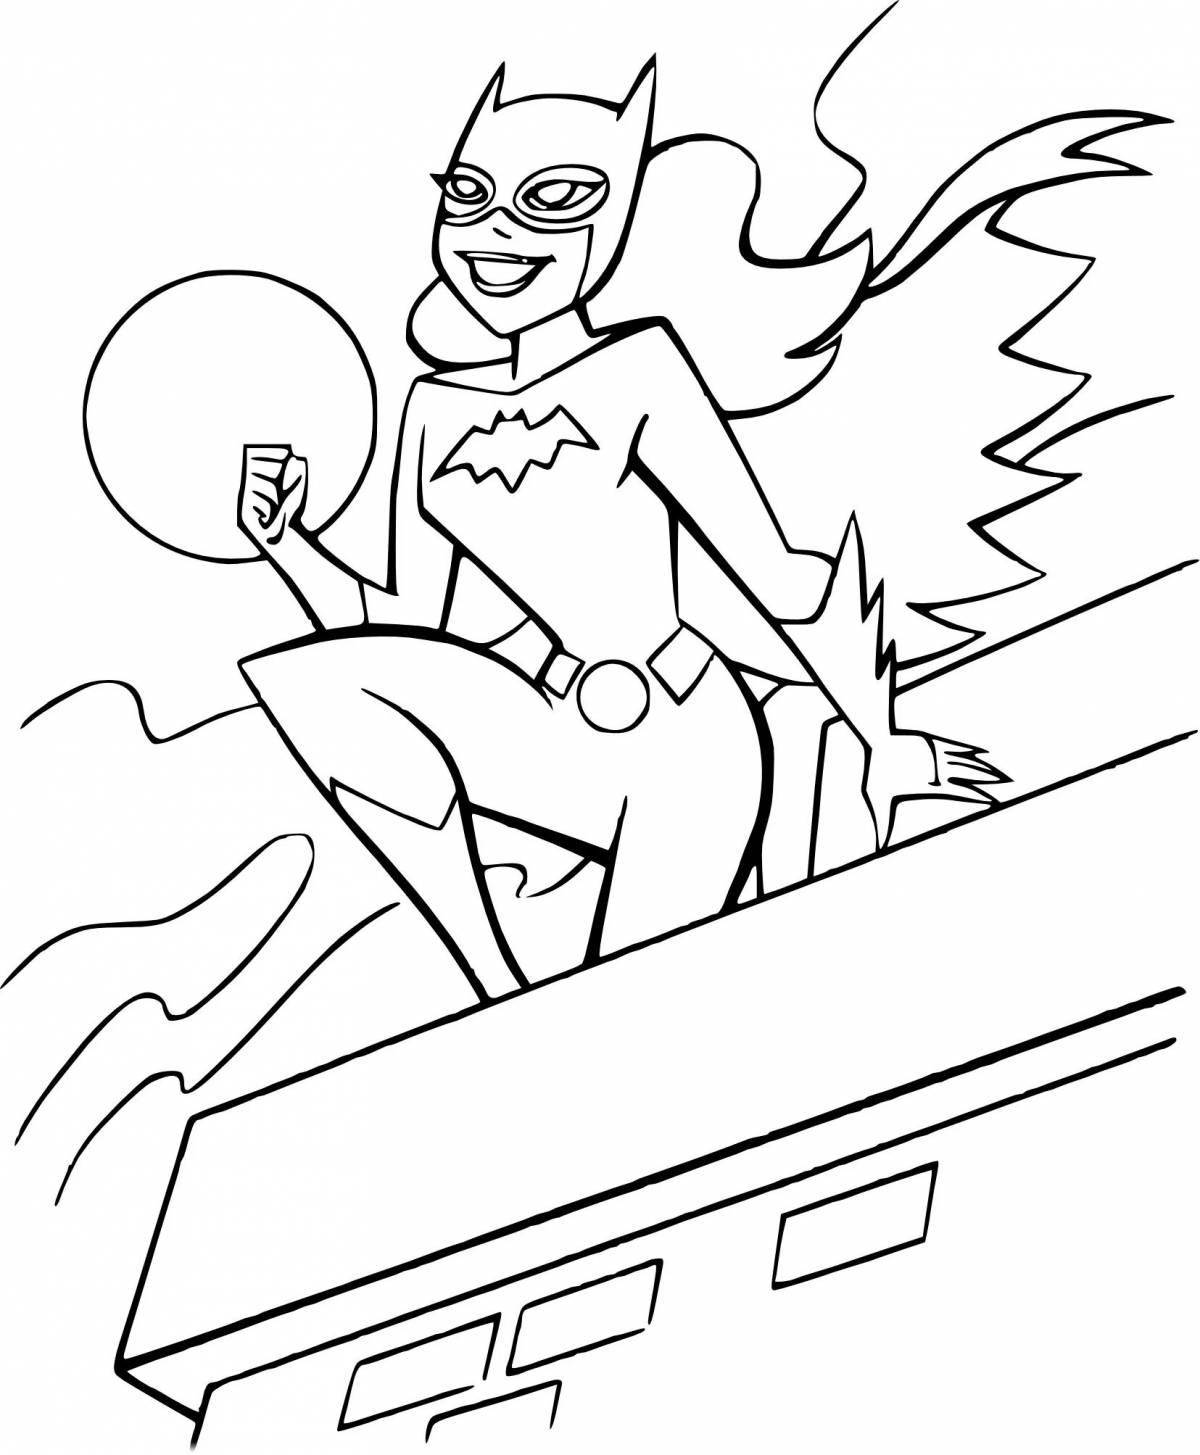 Coloring page energetic super cat